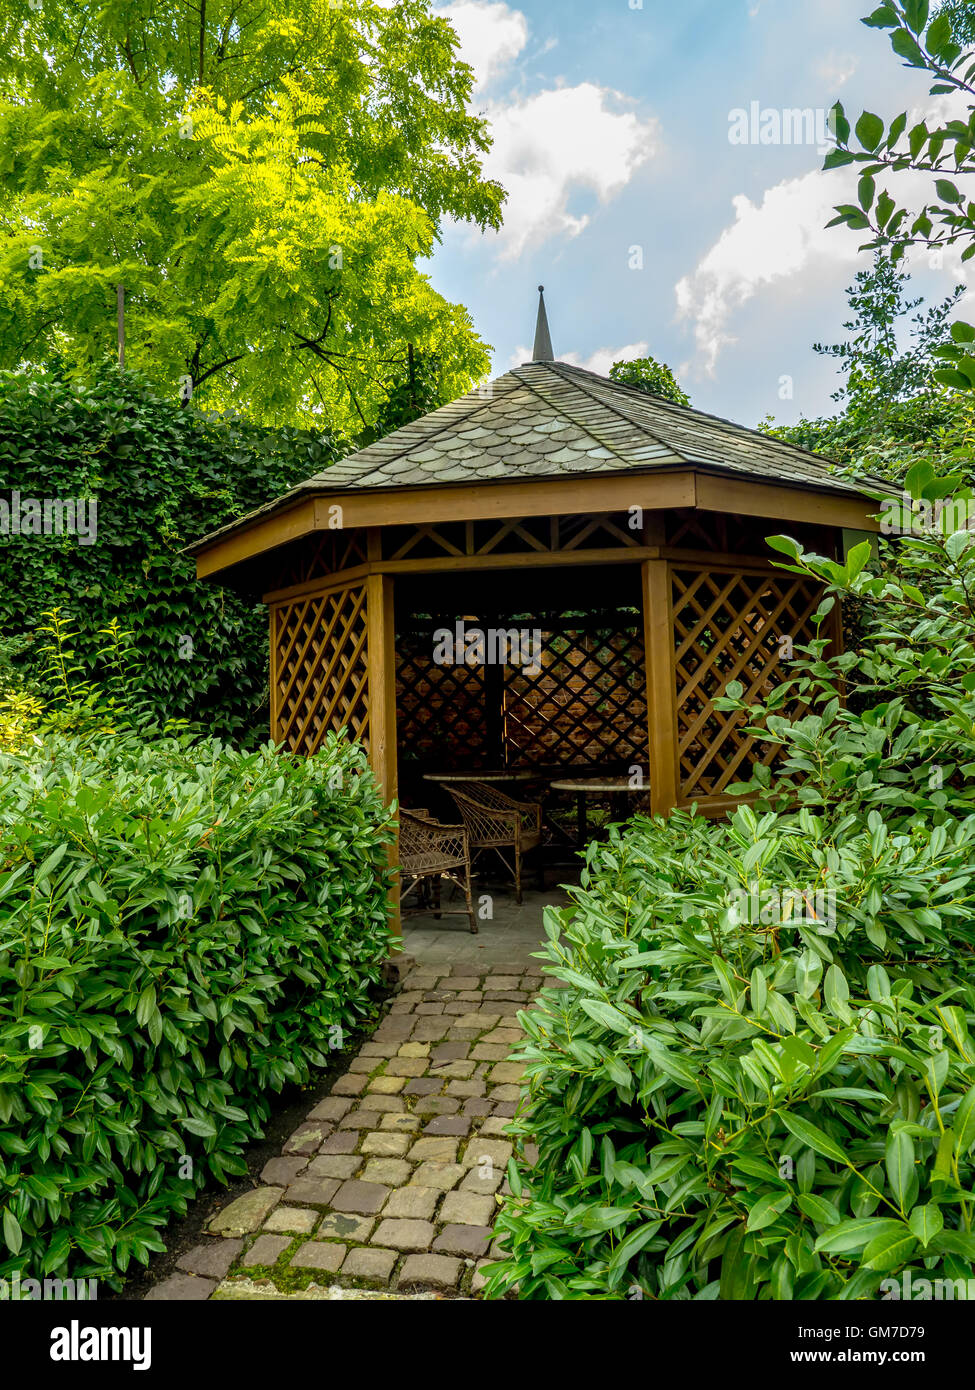 Wooden summer house surrounded by green shrubs and trees Stock Photo